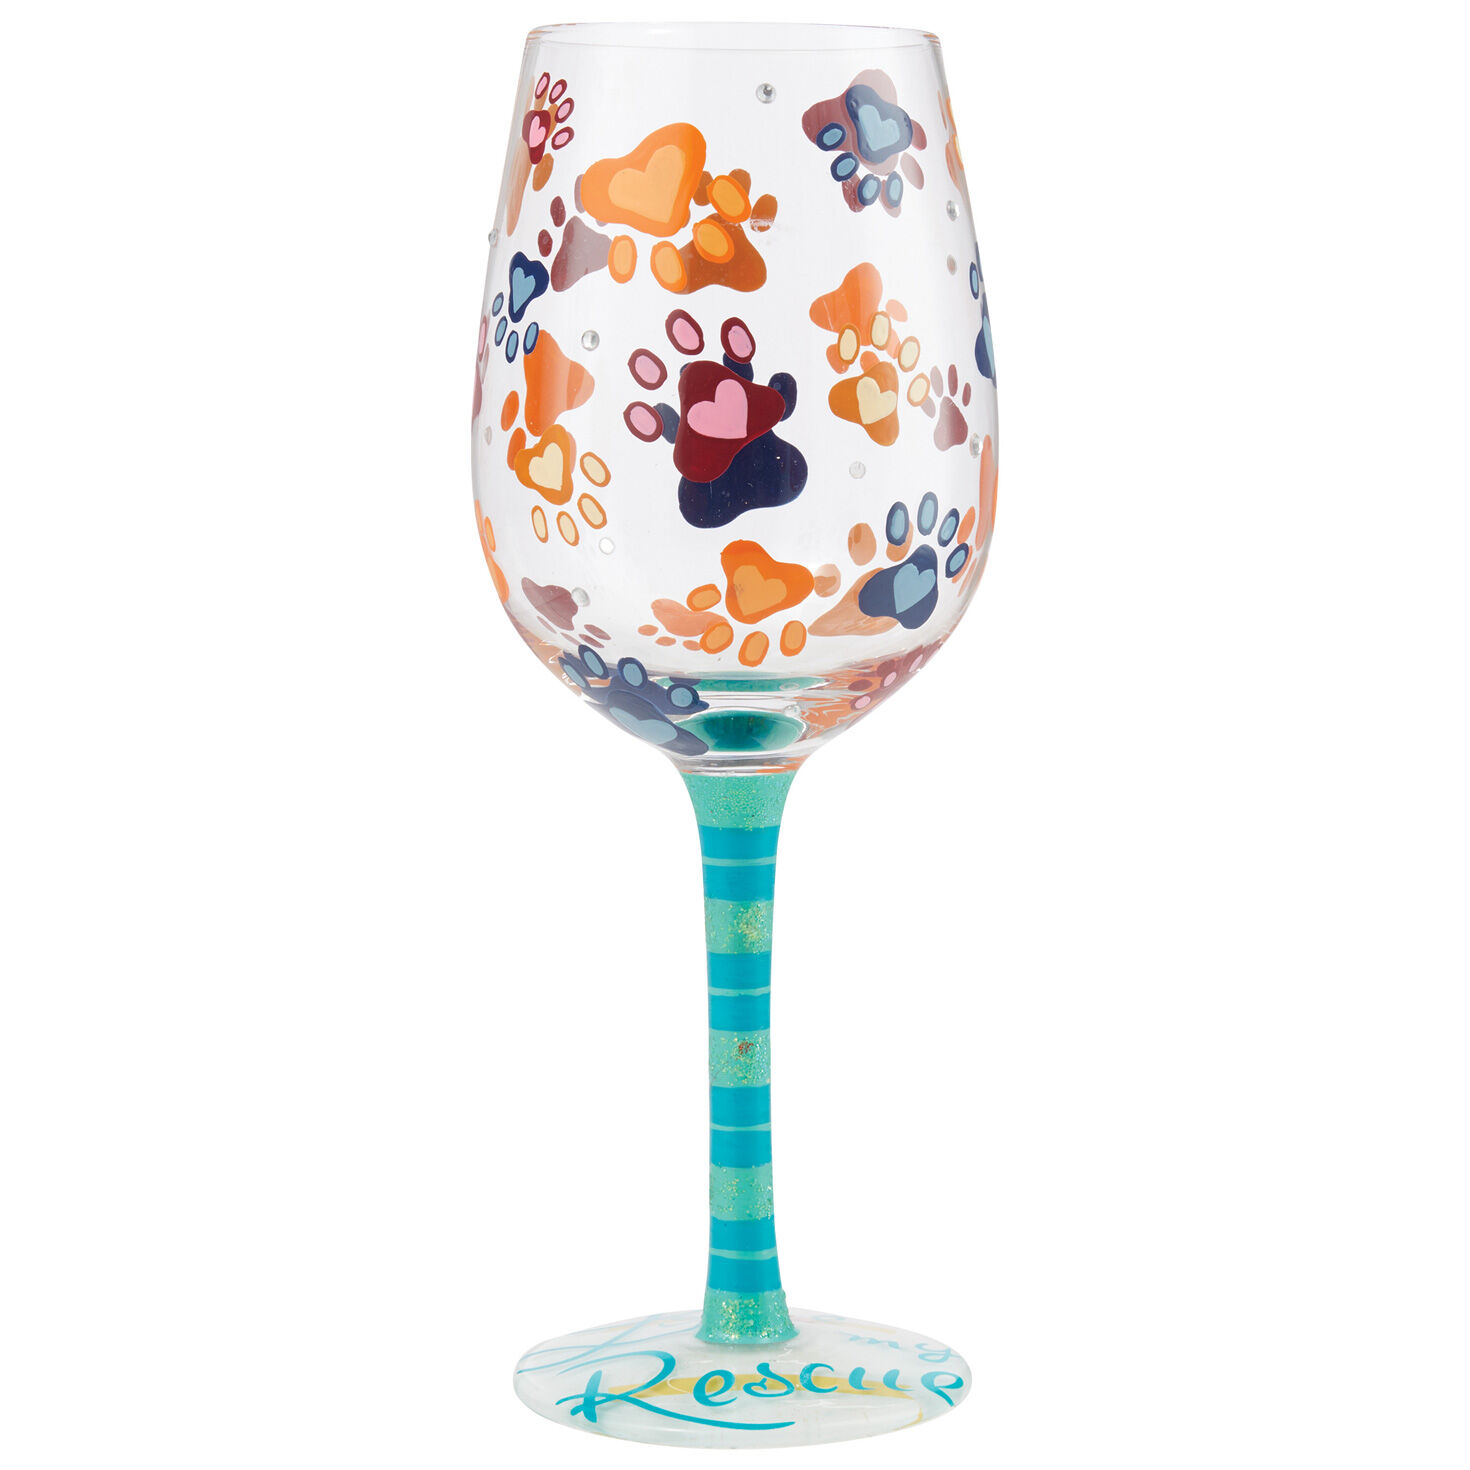 https://www.hallmark.com/dw/image/v2/AALB_PRD/on/demandware.static/-/Sites-hallmark-master/default/dw8dd0e3e7/images/finished-goods/products/6008798/Colored-Paw-Prints-Handpainted-Wine-Glass_6008798_01.jpg?sfrm=jpg